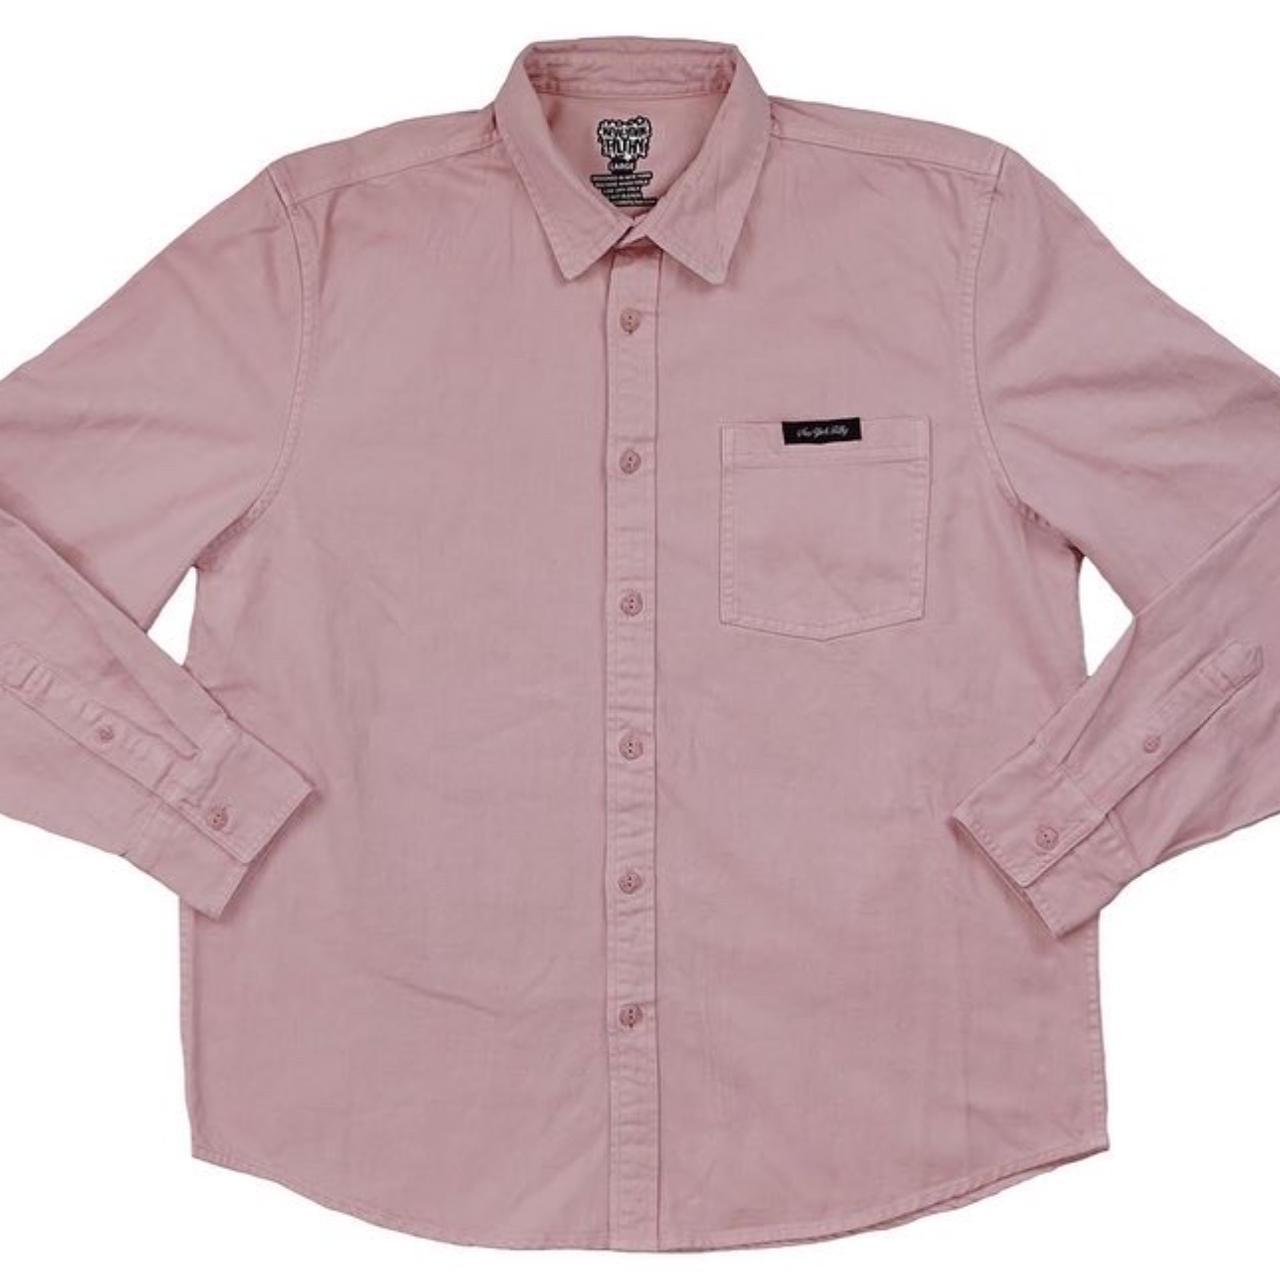 New York Filthy Men's Cream and Pink Shirt (2)